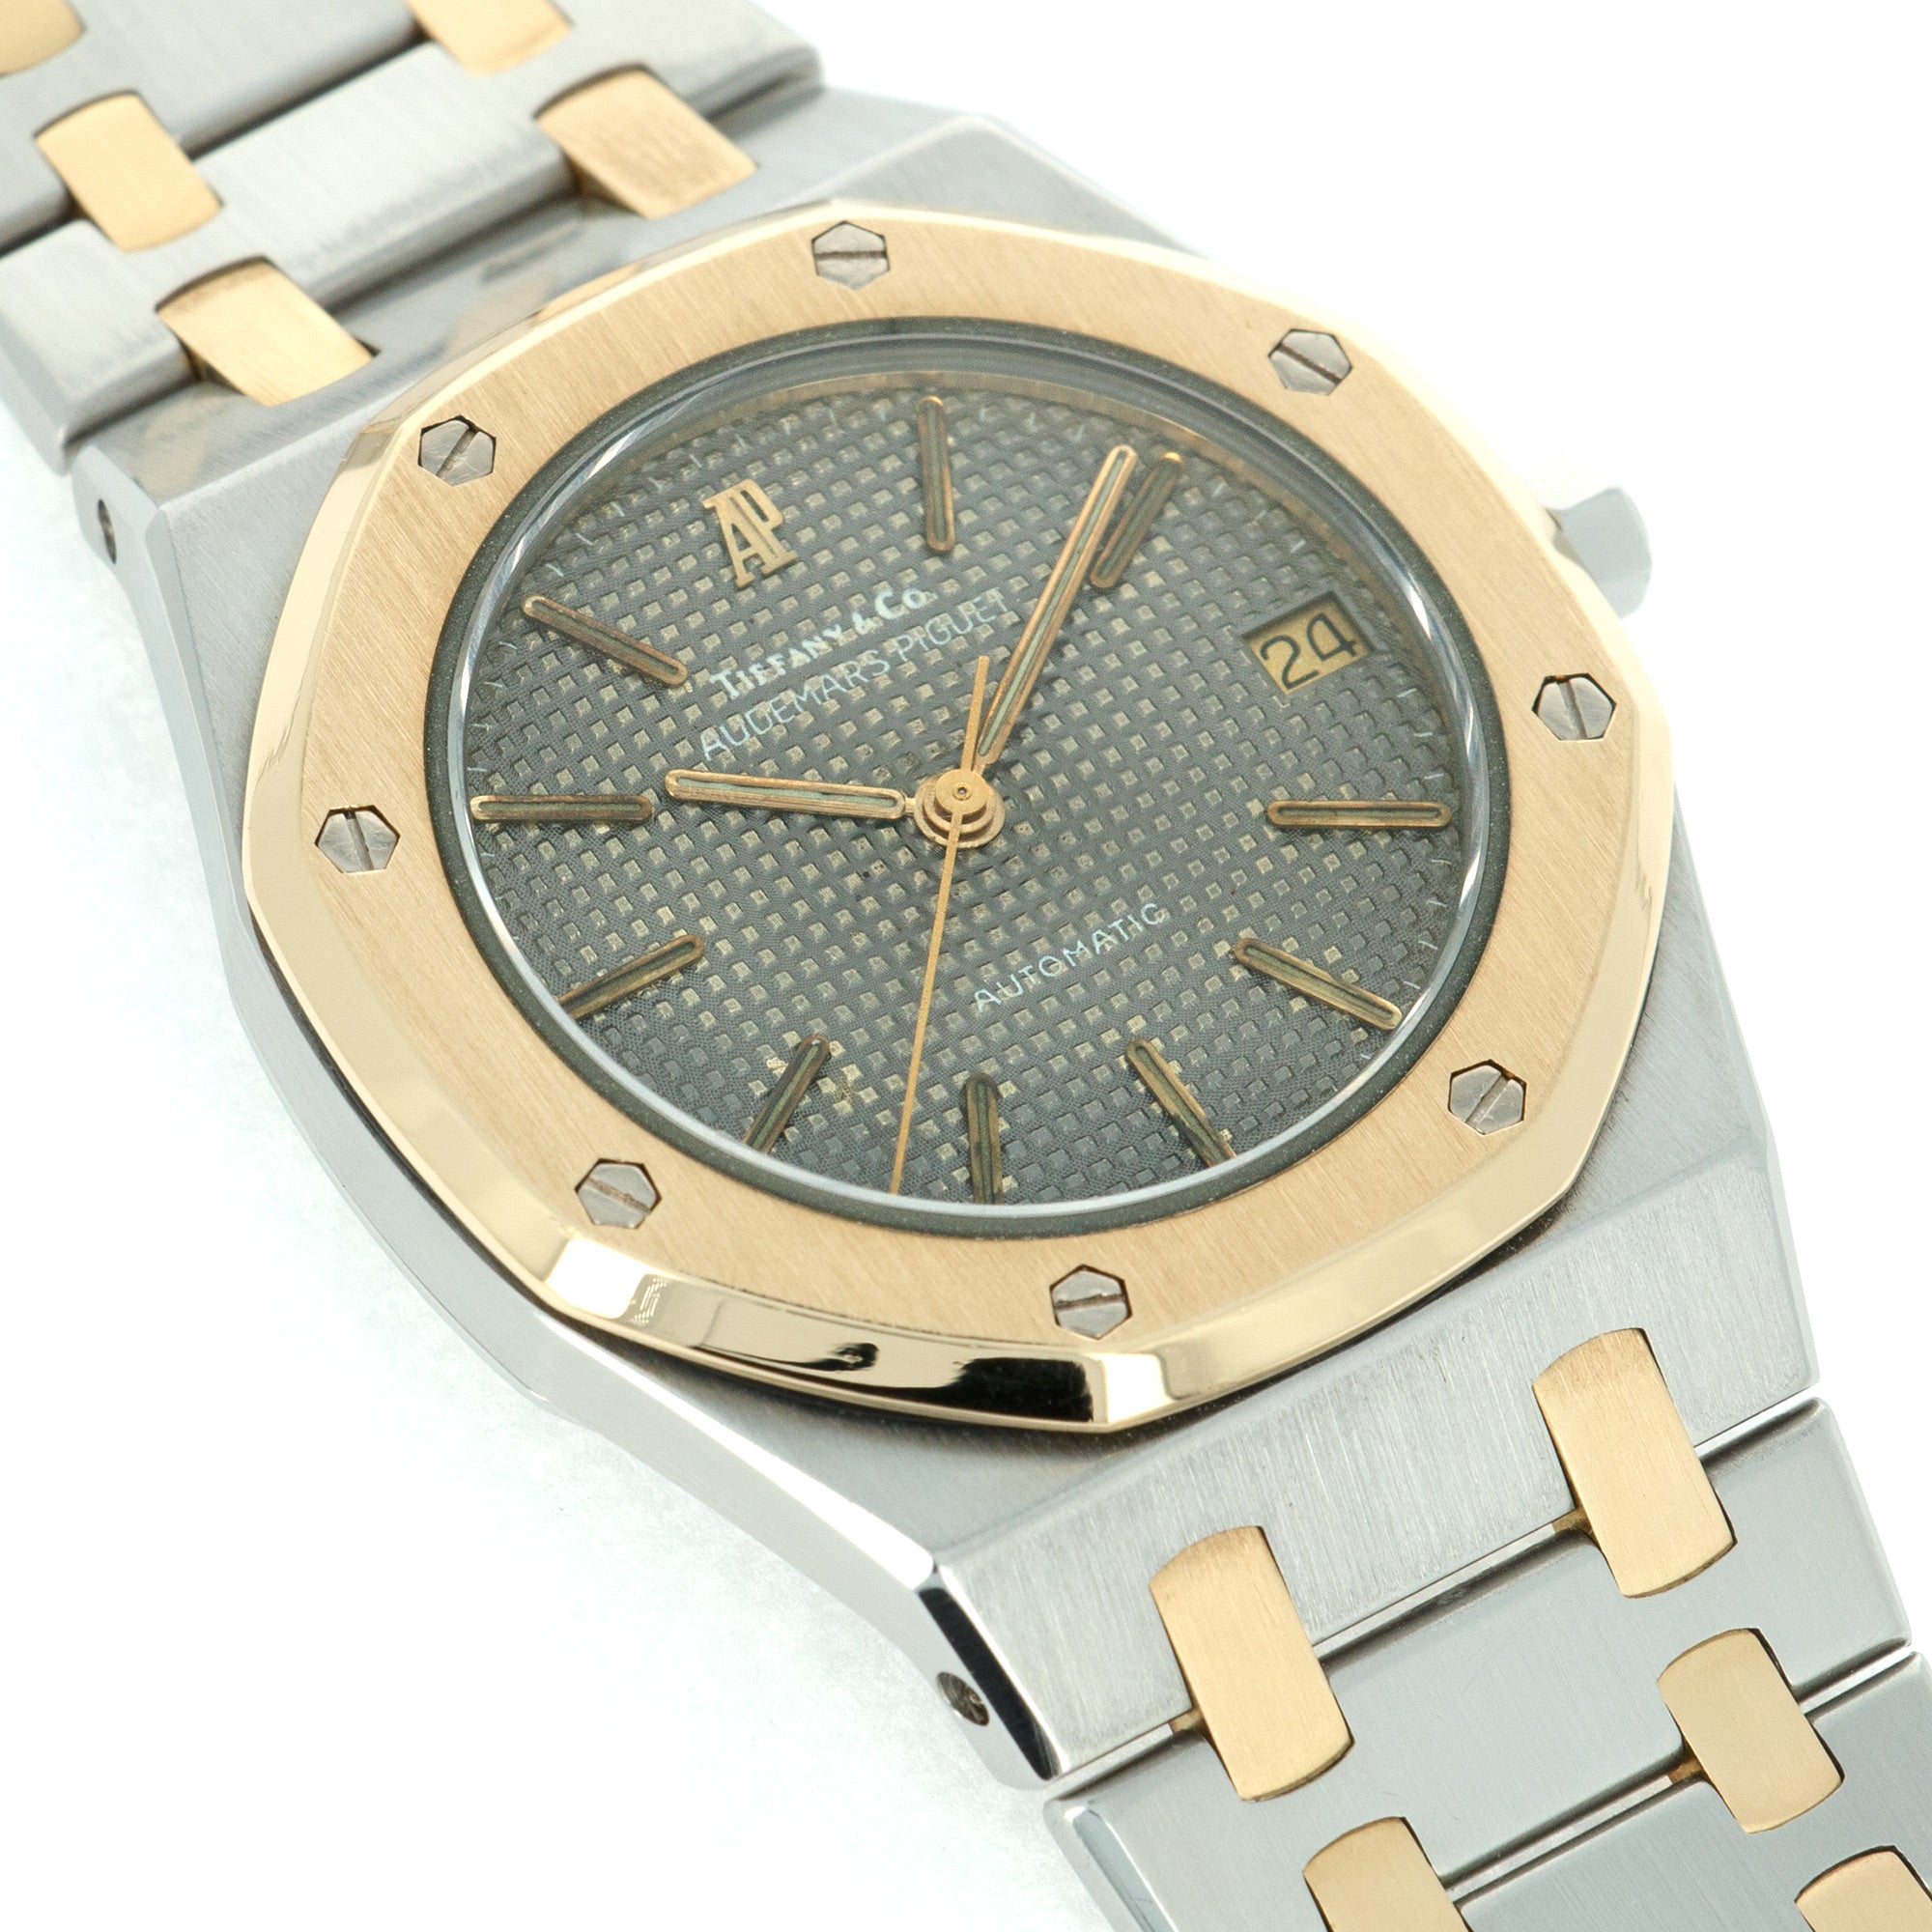 Audemars Piguet - Audemars Piguet Two-Tone Royal Oak Automatic Watch Ref. 4100, Retailed by Tiffany &amp; Co. - The Keystone Watches